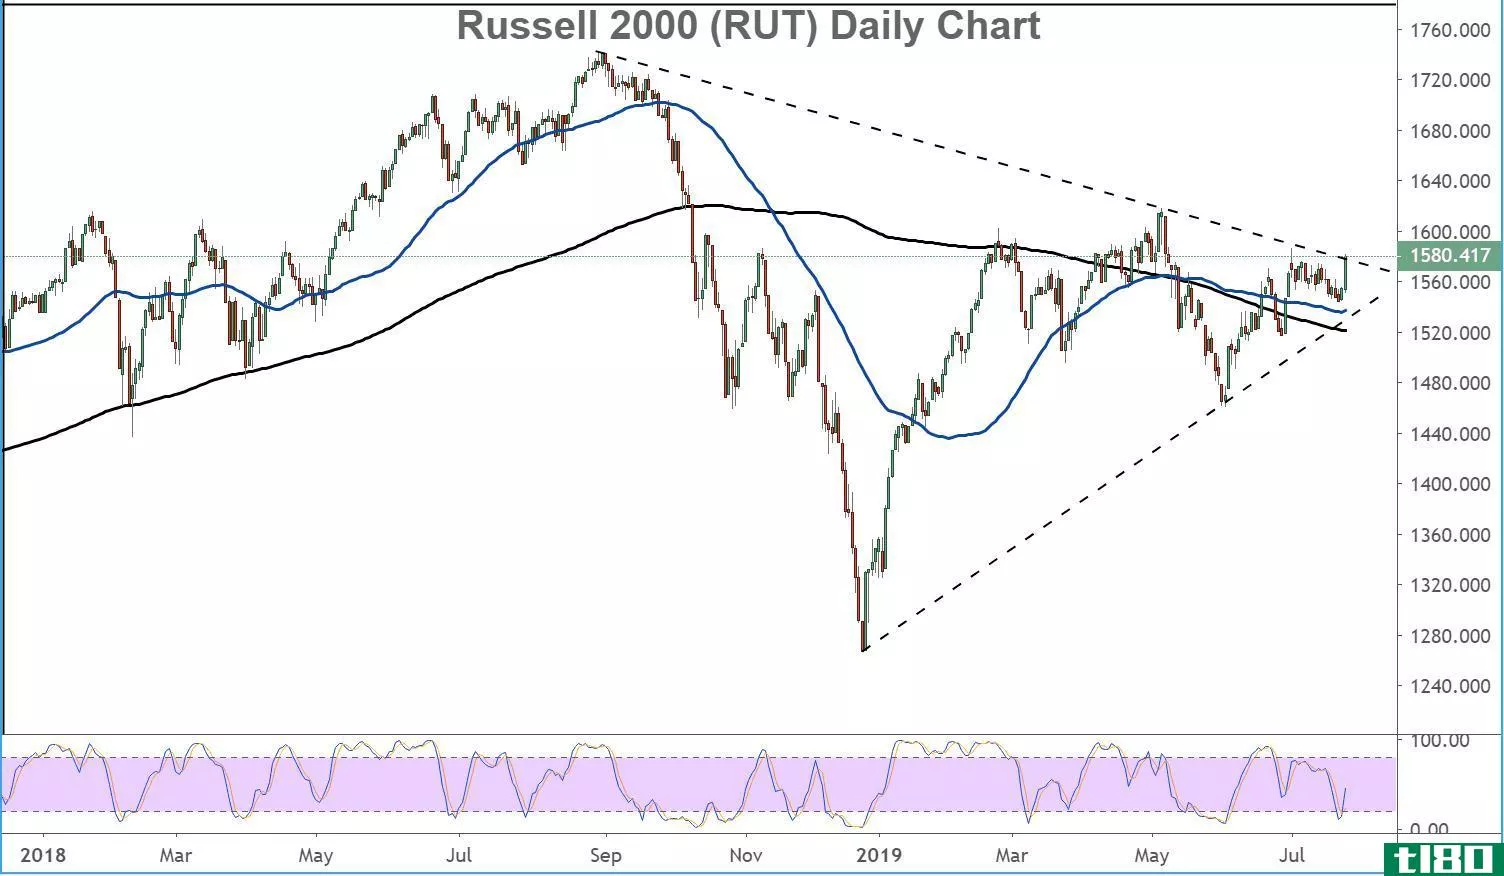 Chart showing the share price performance of the Russell 2000 Index (RUT)